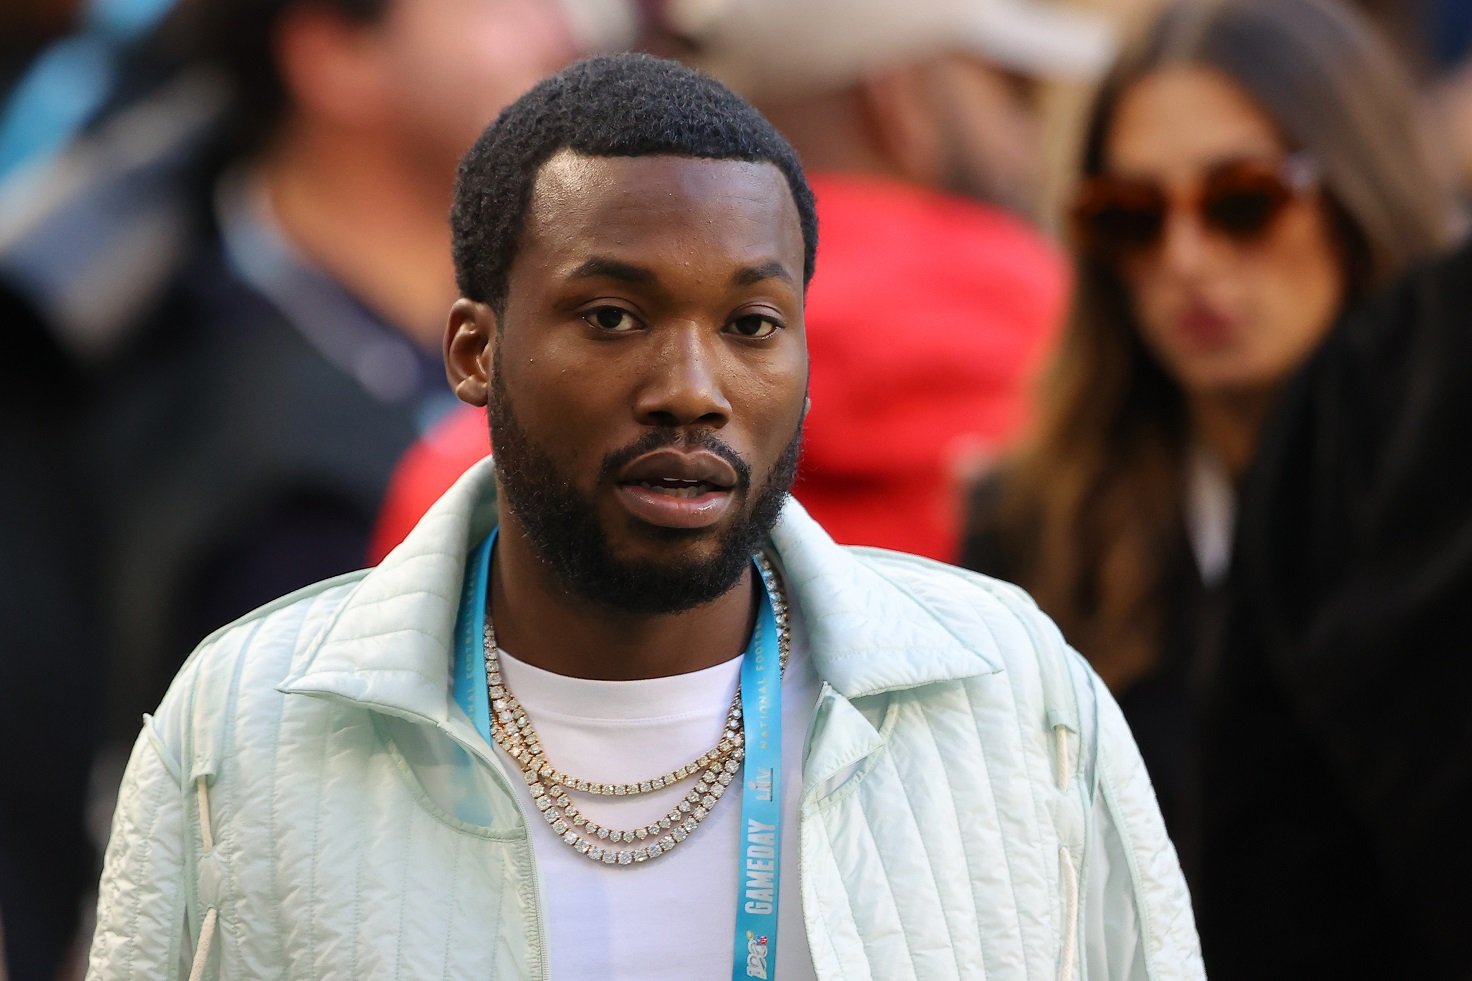 Meek Mill Outfit from July 11, 2021, WHAT'S ON THE STAR?